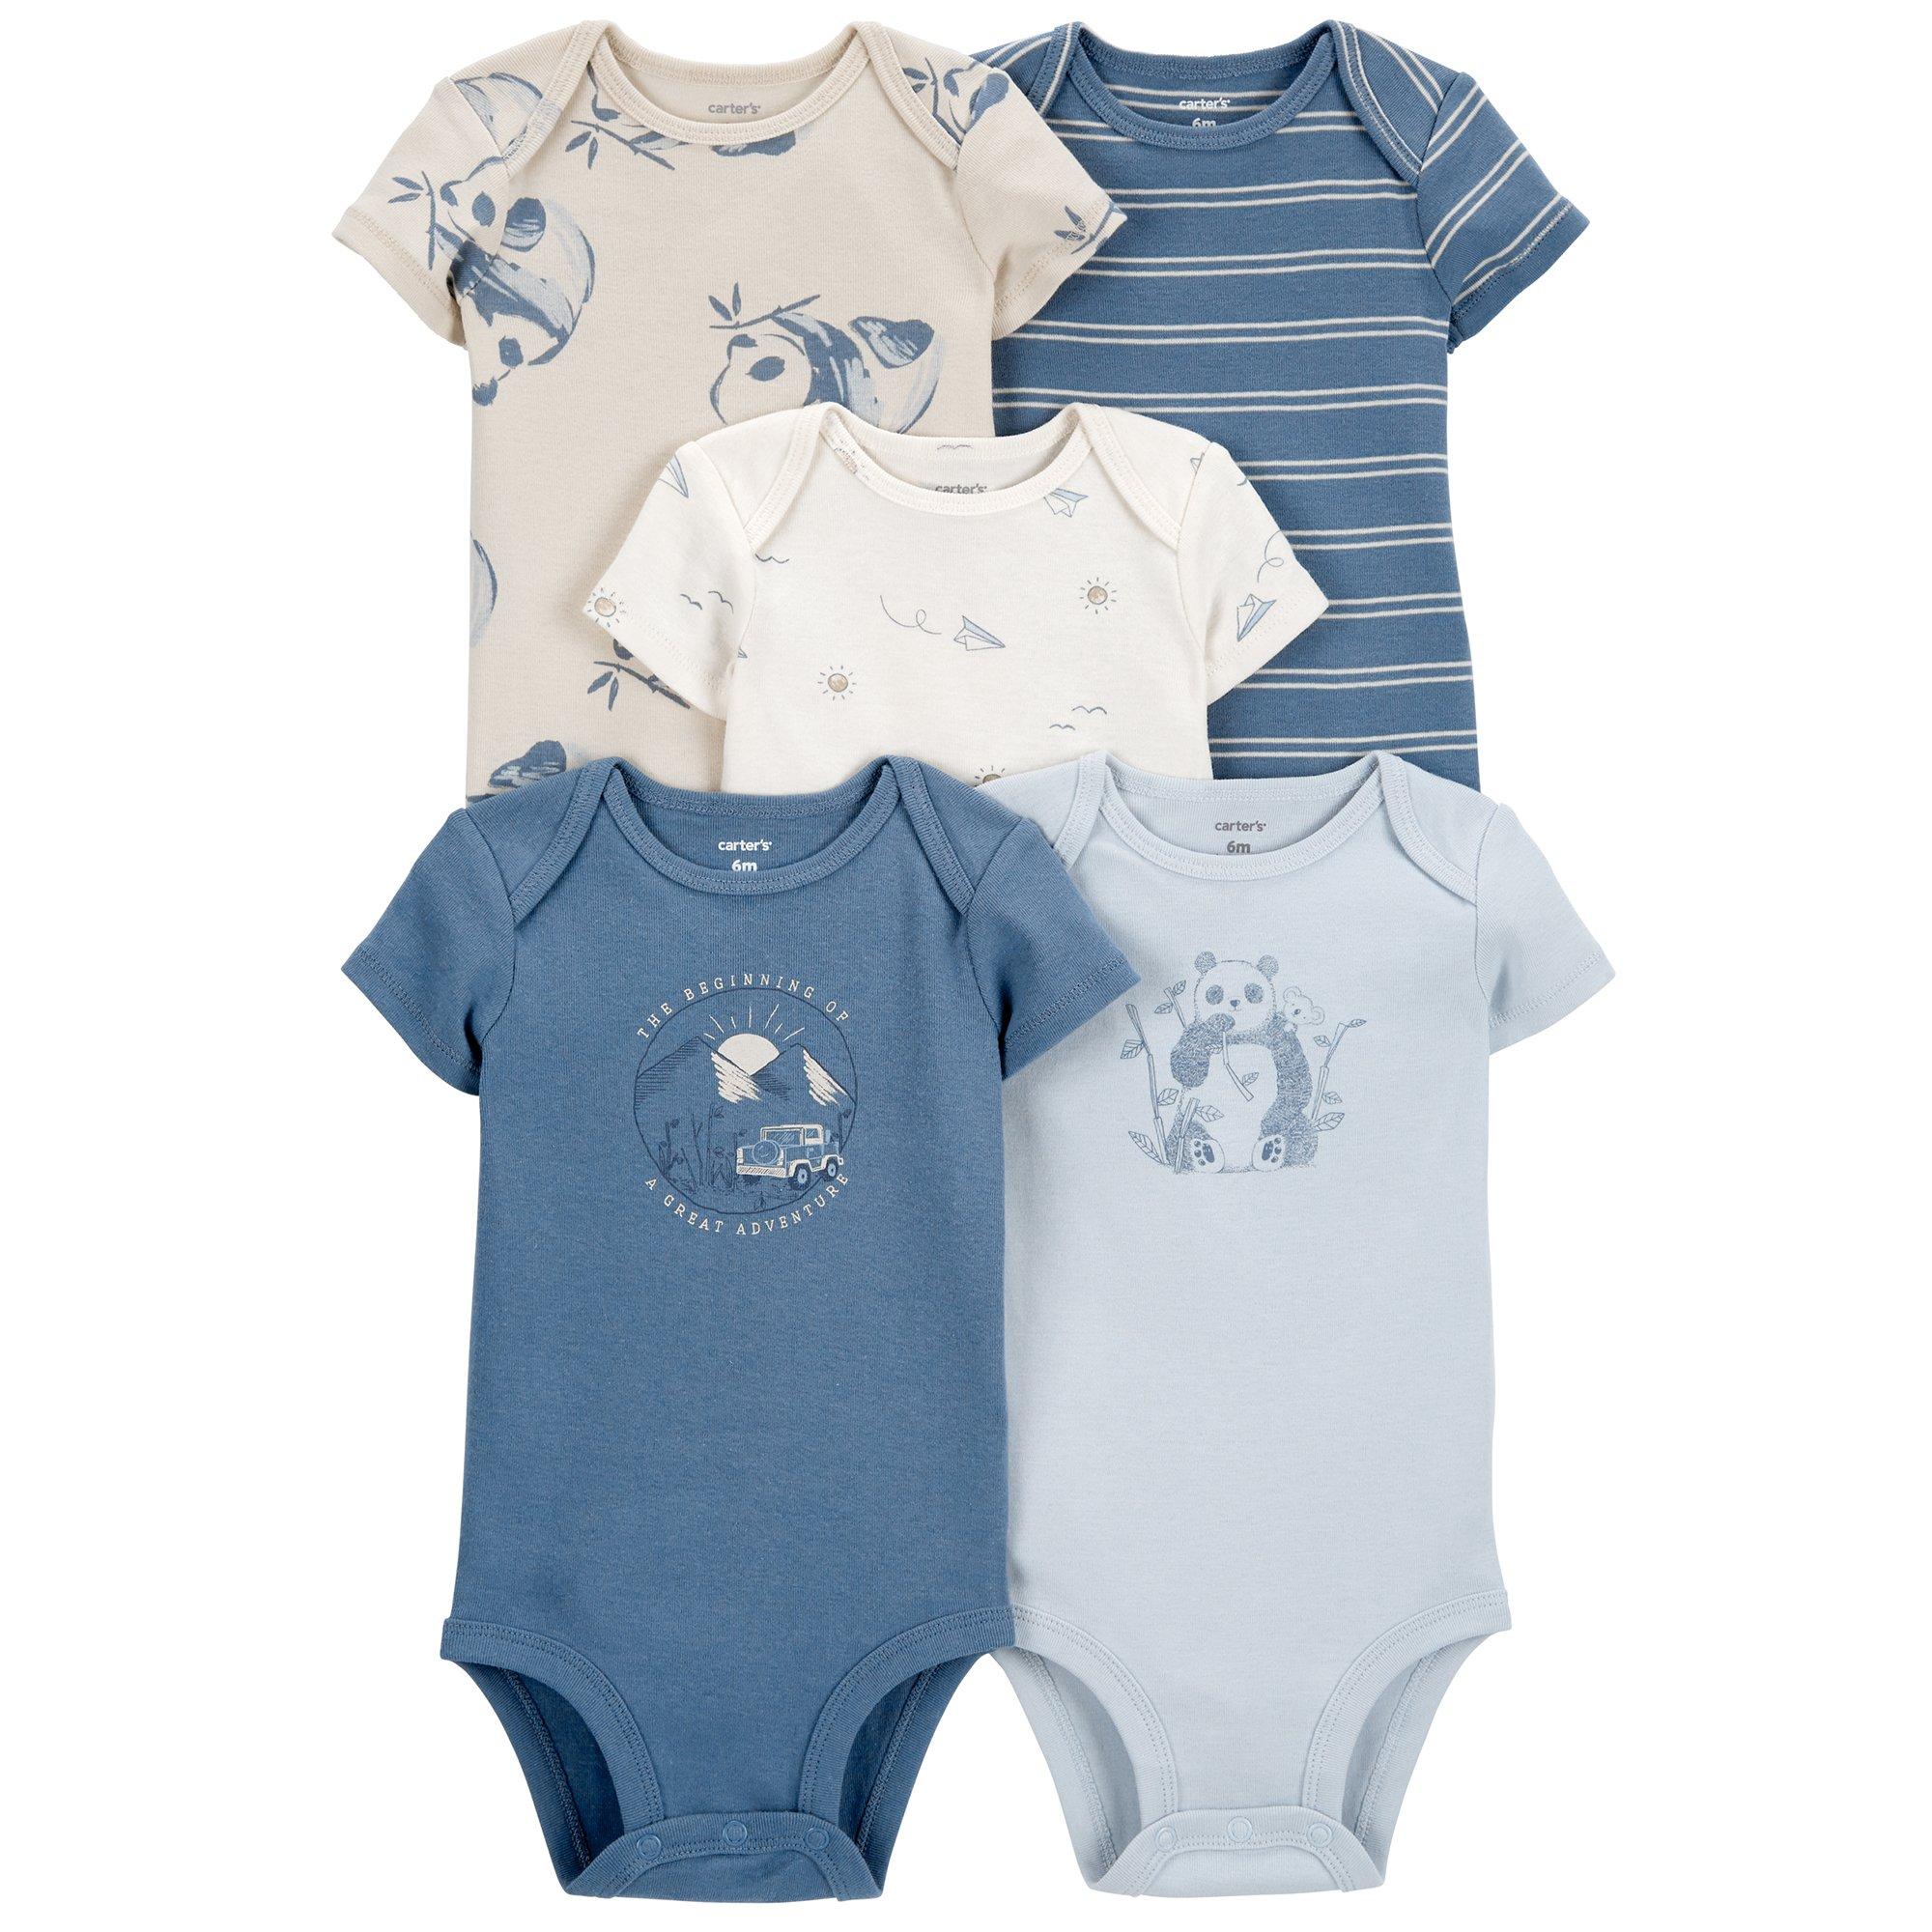 Baby Clothes for Boys, Newborn & Toddler